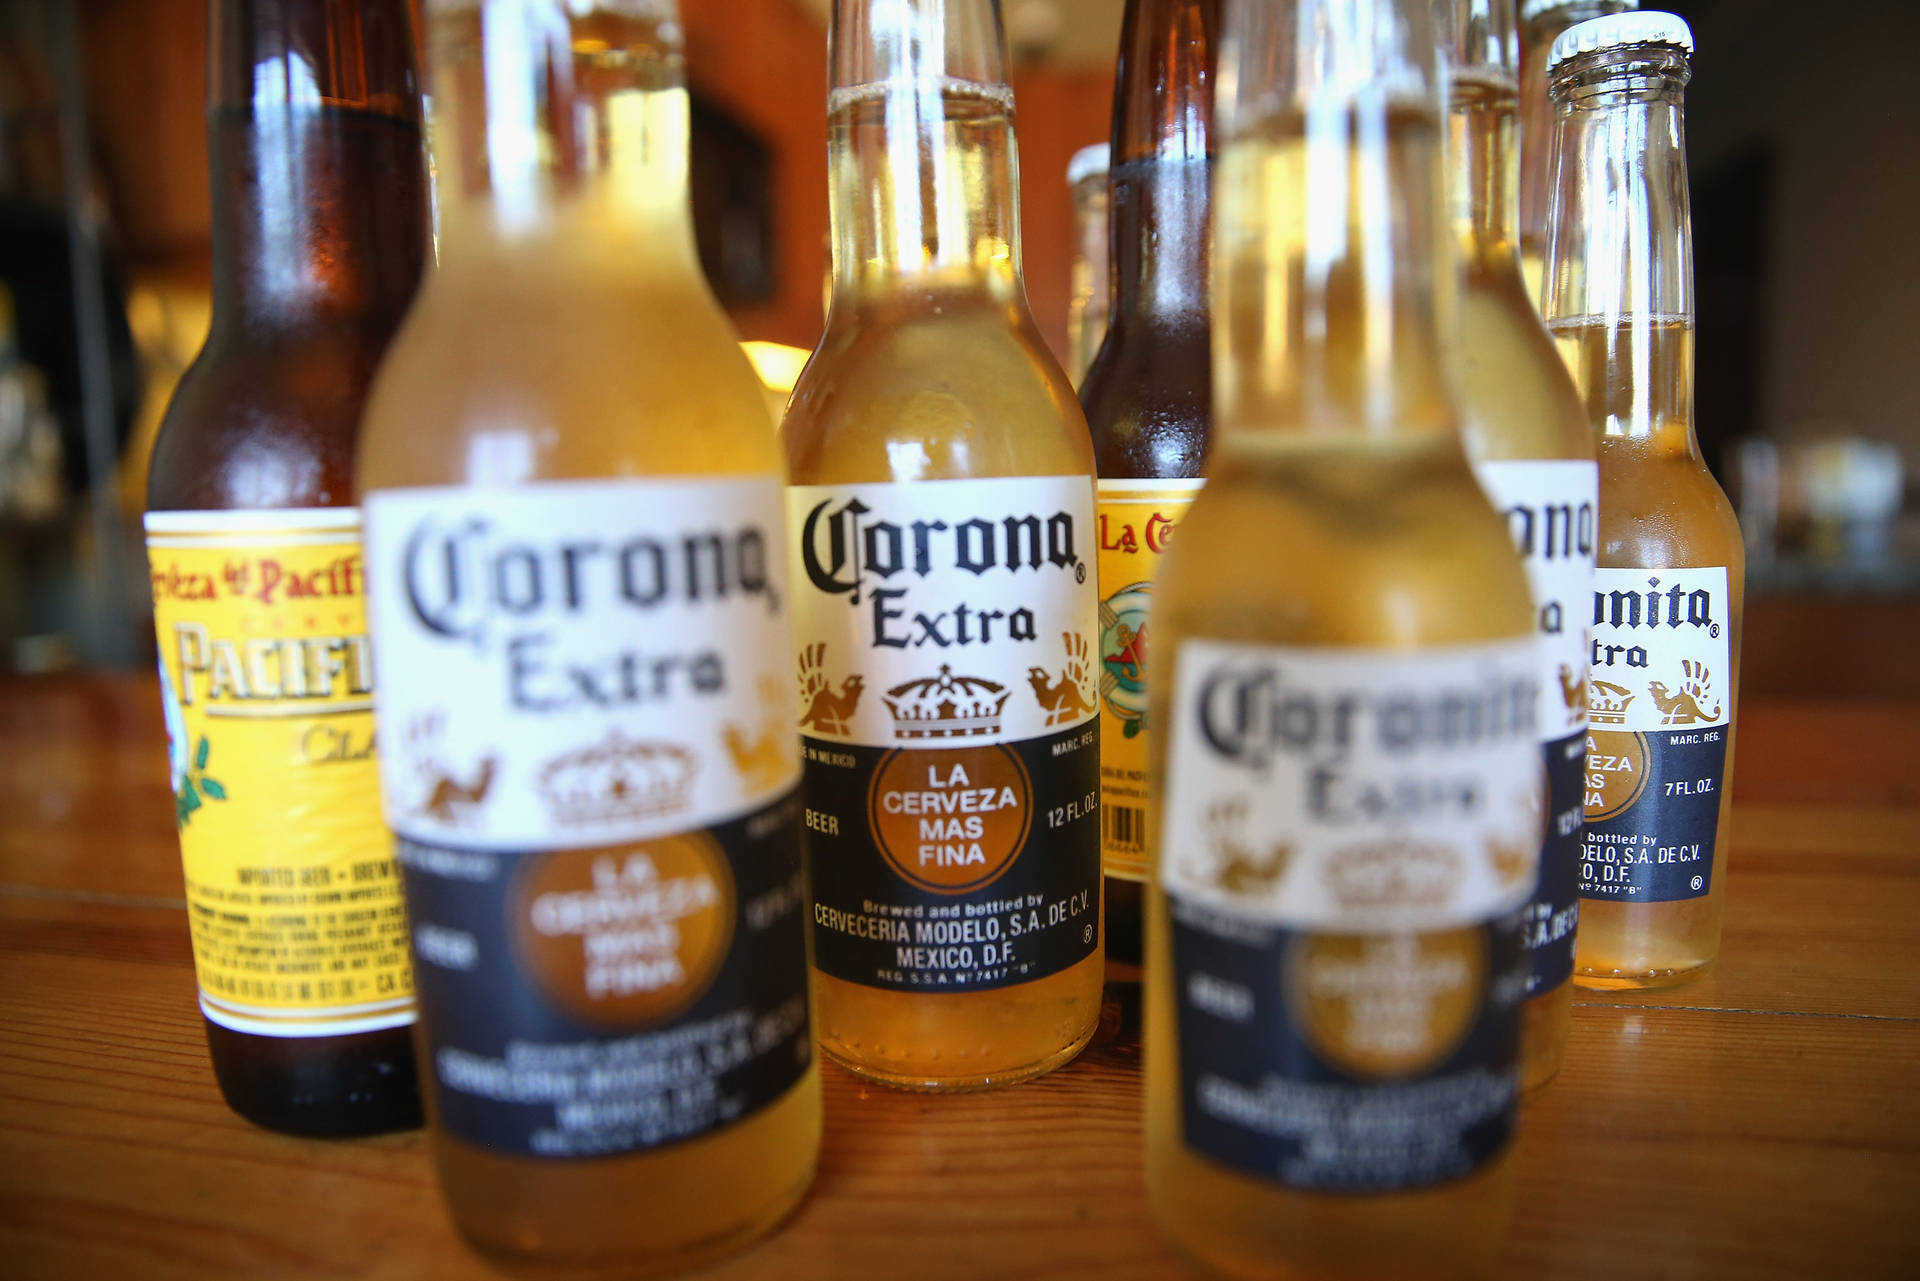 Chilling Corona Extra and Pacifico Clara Bottles Wallpaper